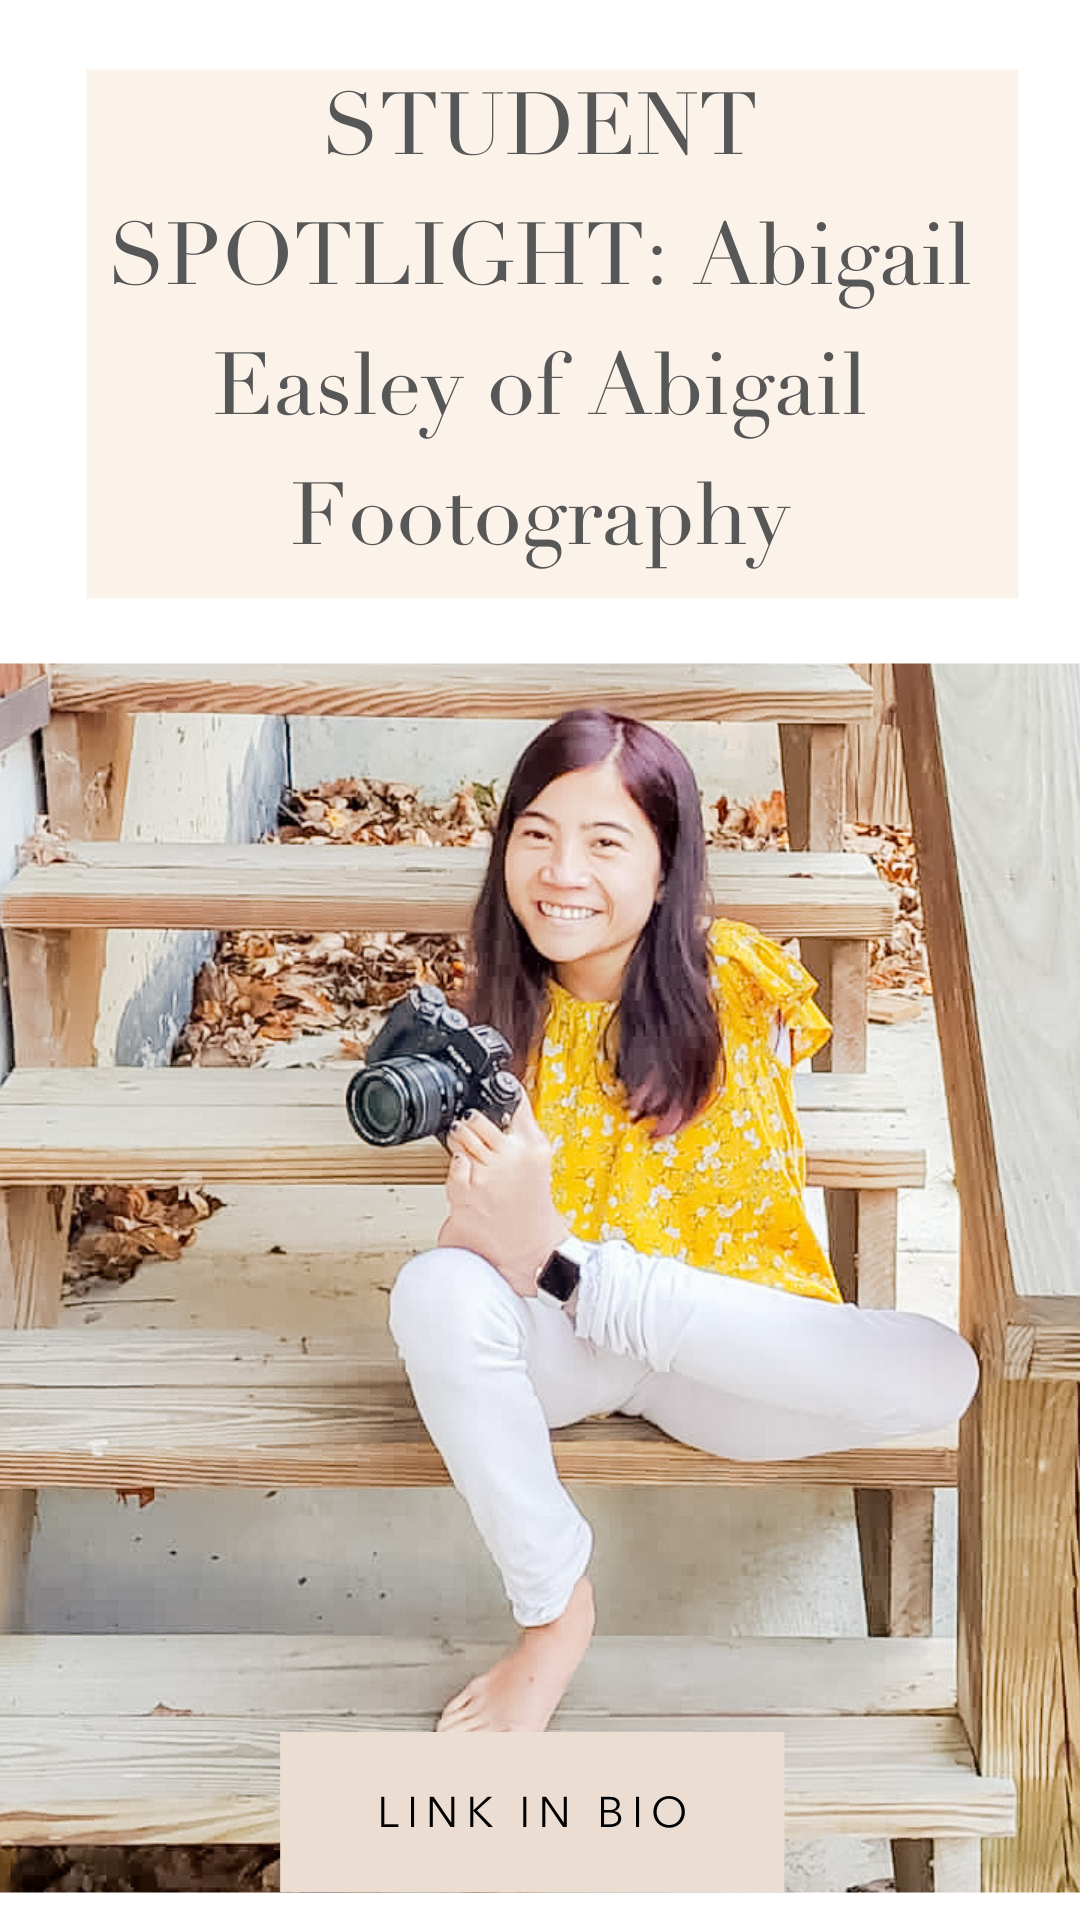 Student spotlight of Abigail Easley Footography